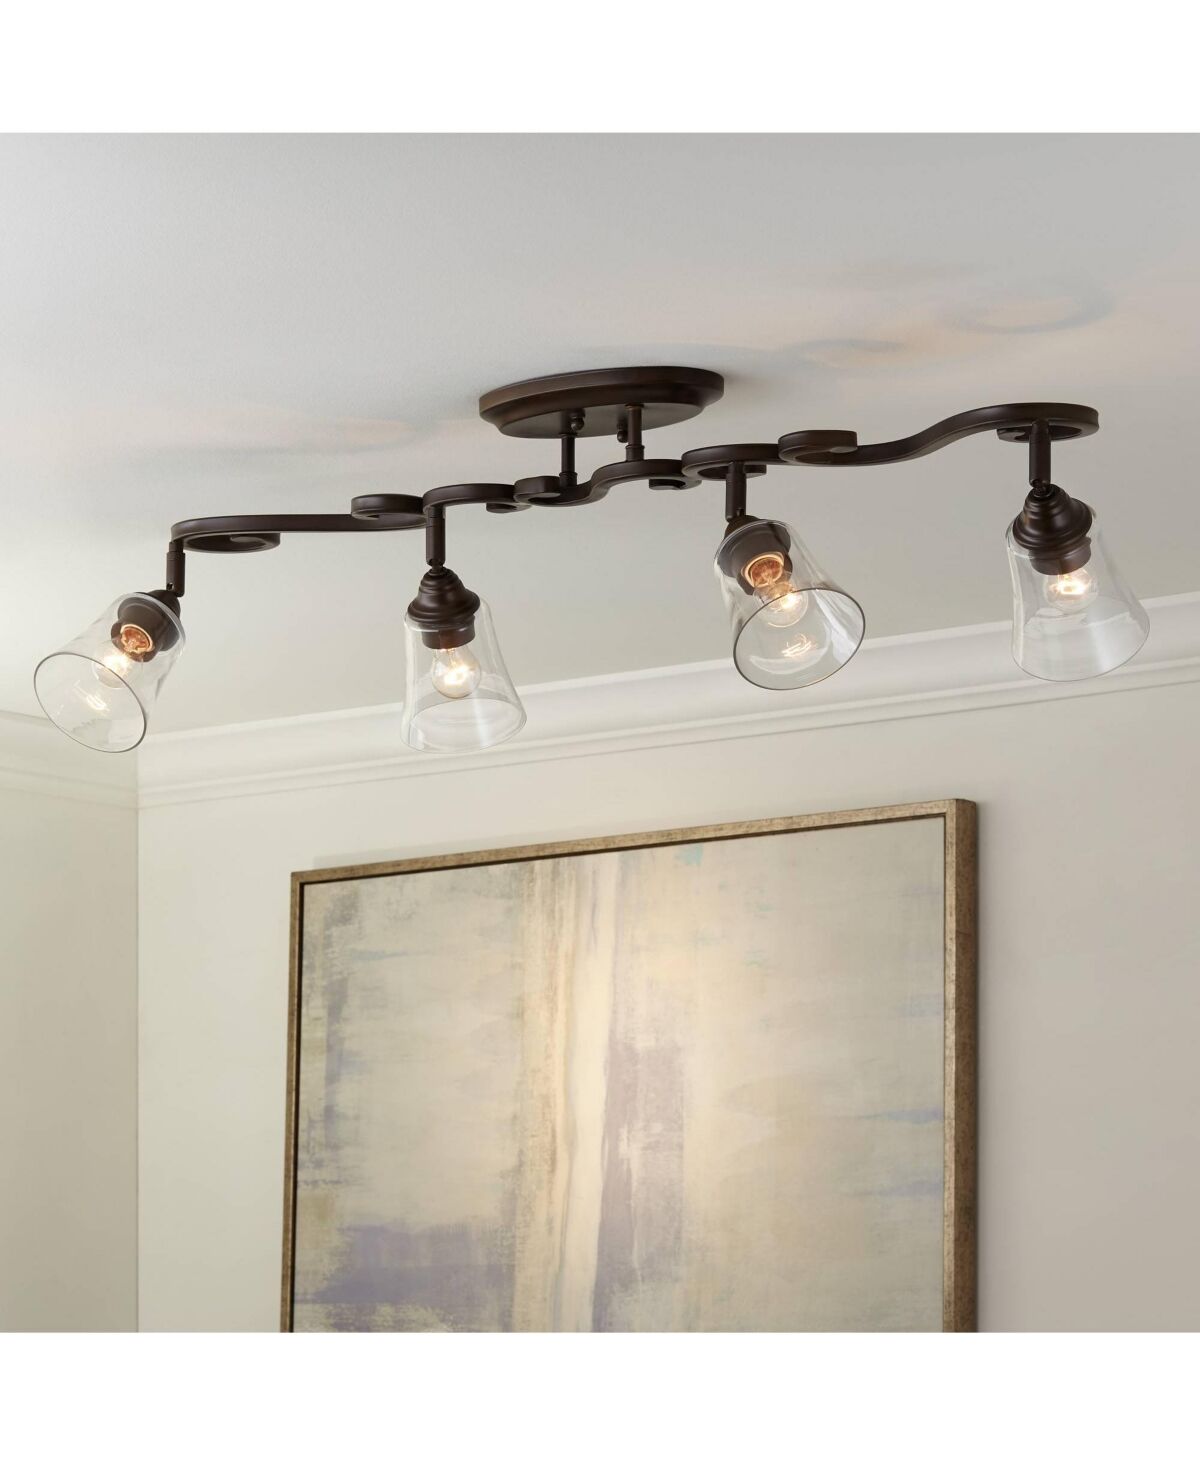 Pro Track Myrna 4-Head Ceiling or Wall Track Light Fixture Kit Directional Brown Bronze Finish Glass Modern Industrial Scroll Kitchen Bathroom Living Room Dinin